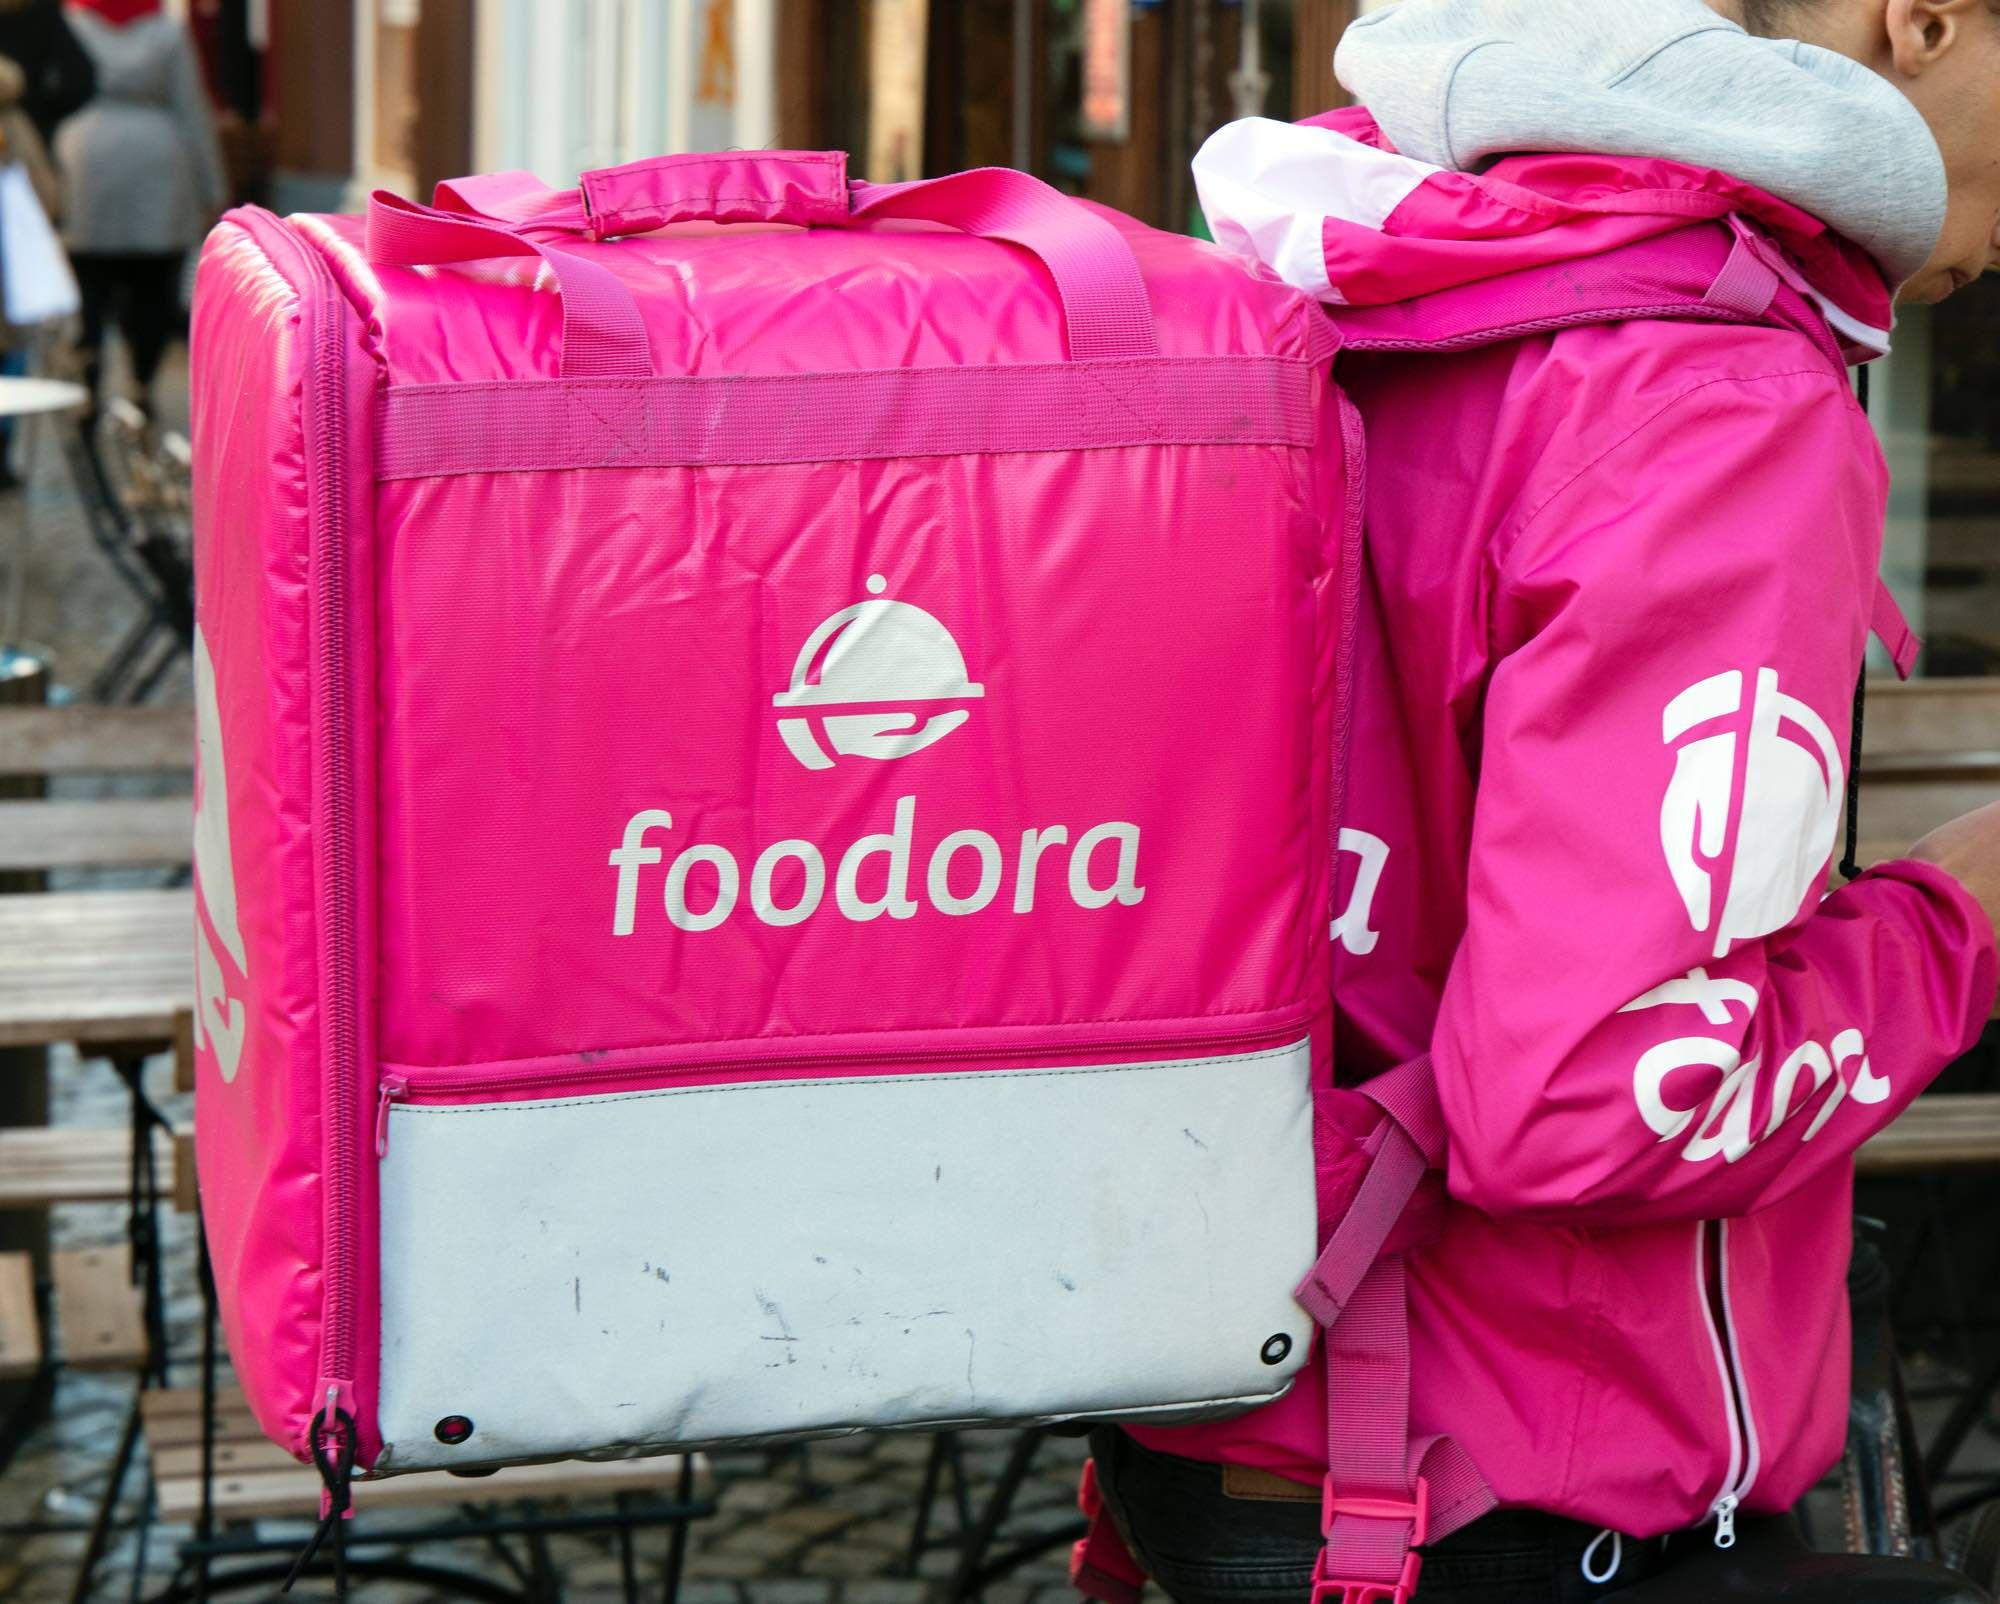 Foodora couriers lose jobs but reach settlement